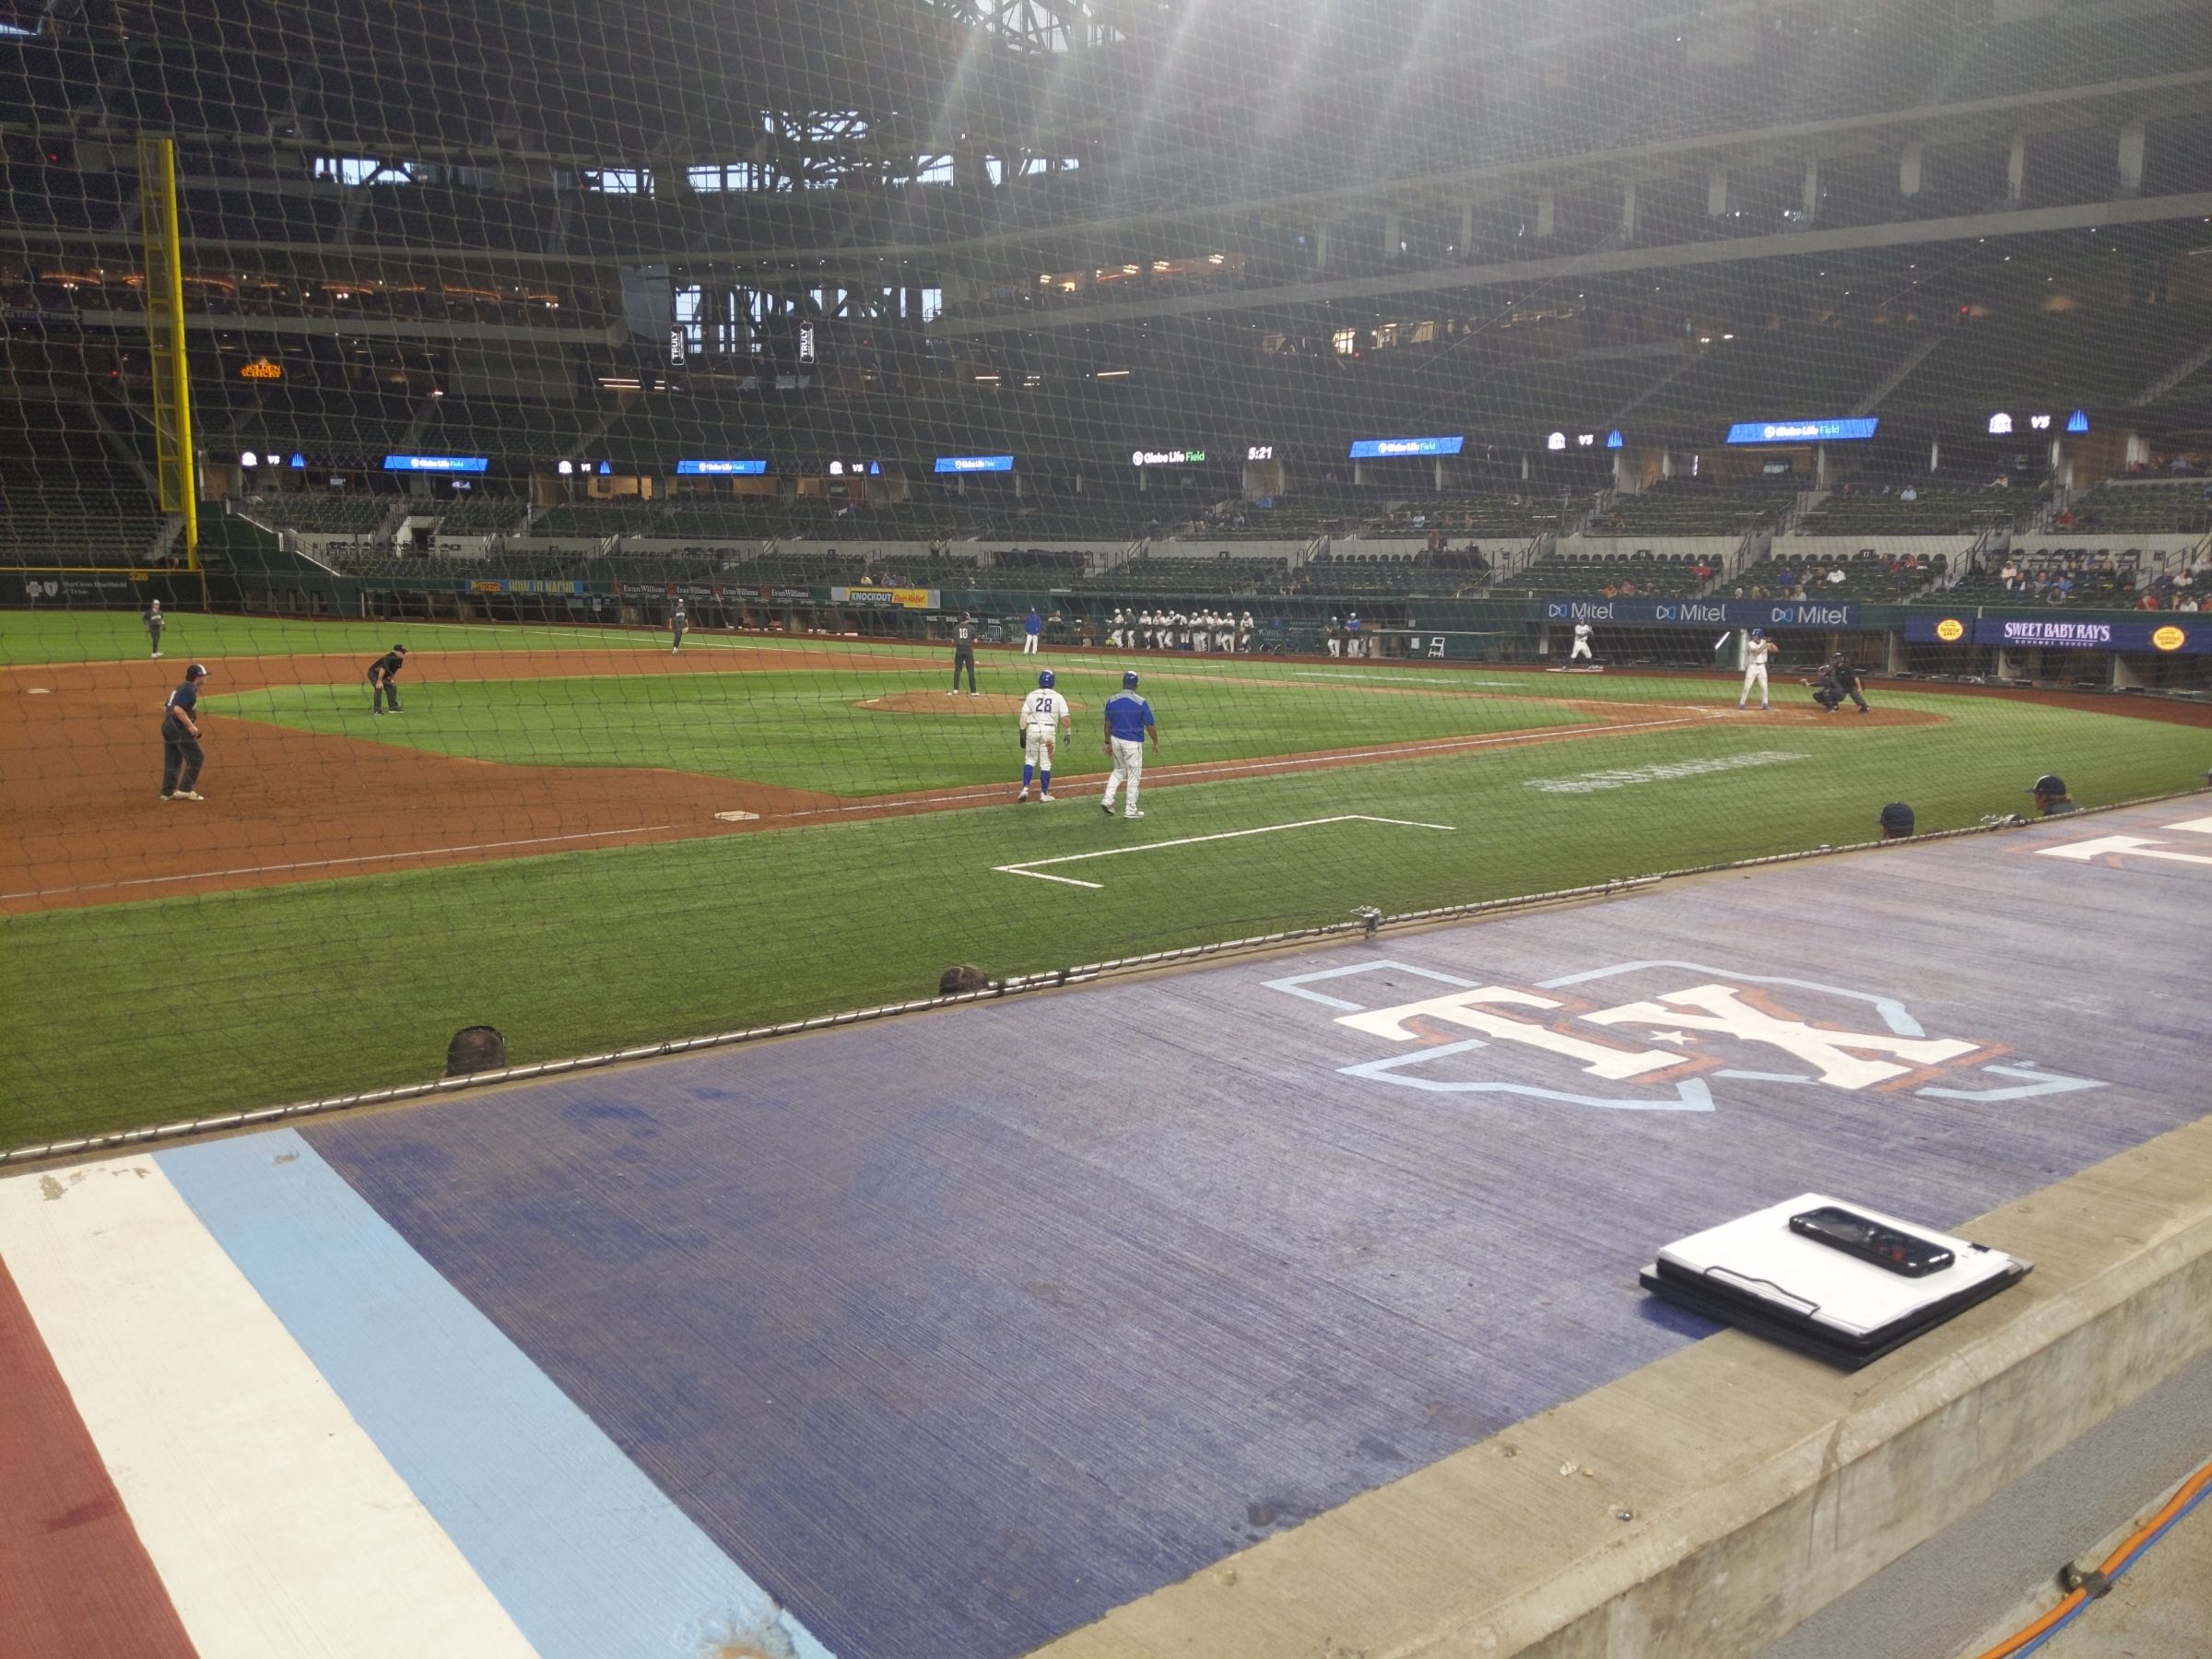 section 7, row 3 seat view  - globe life field